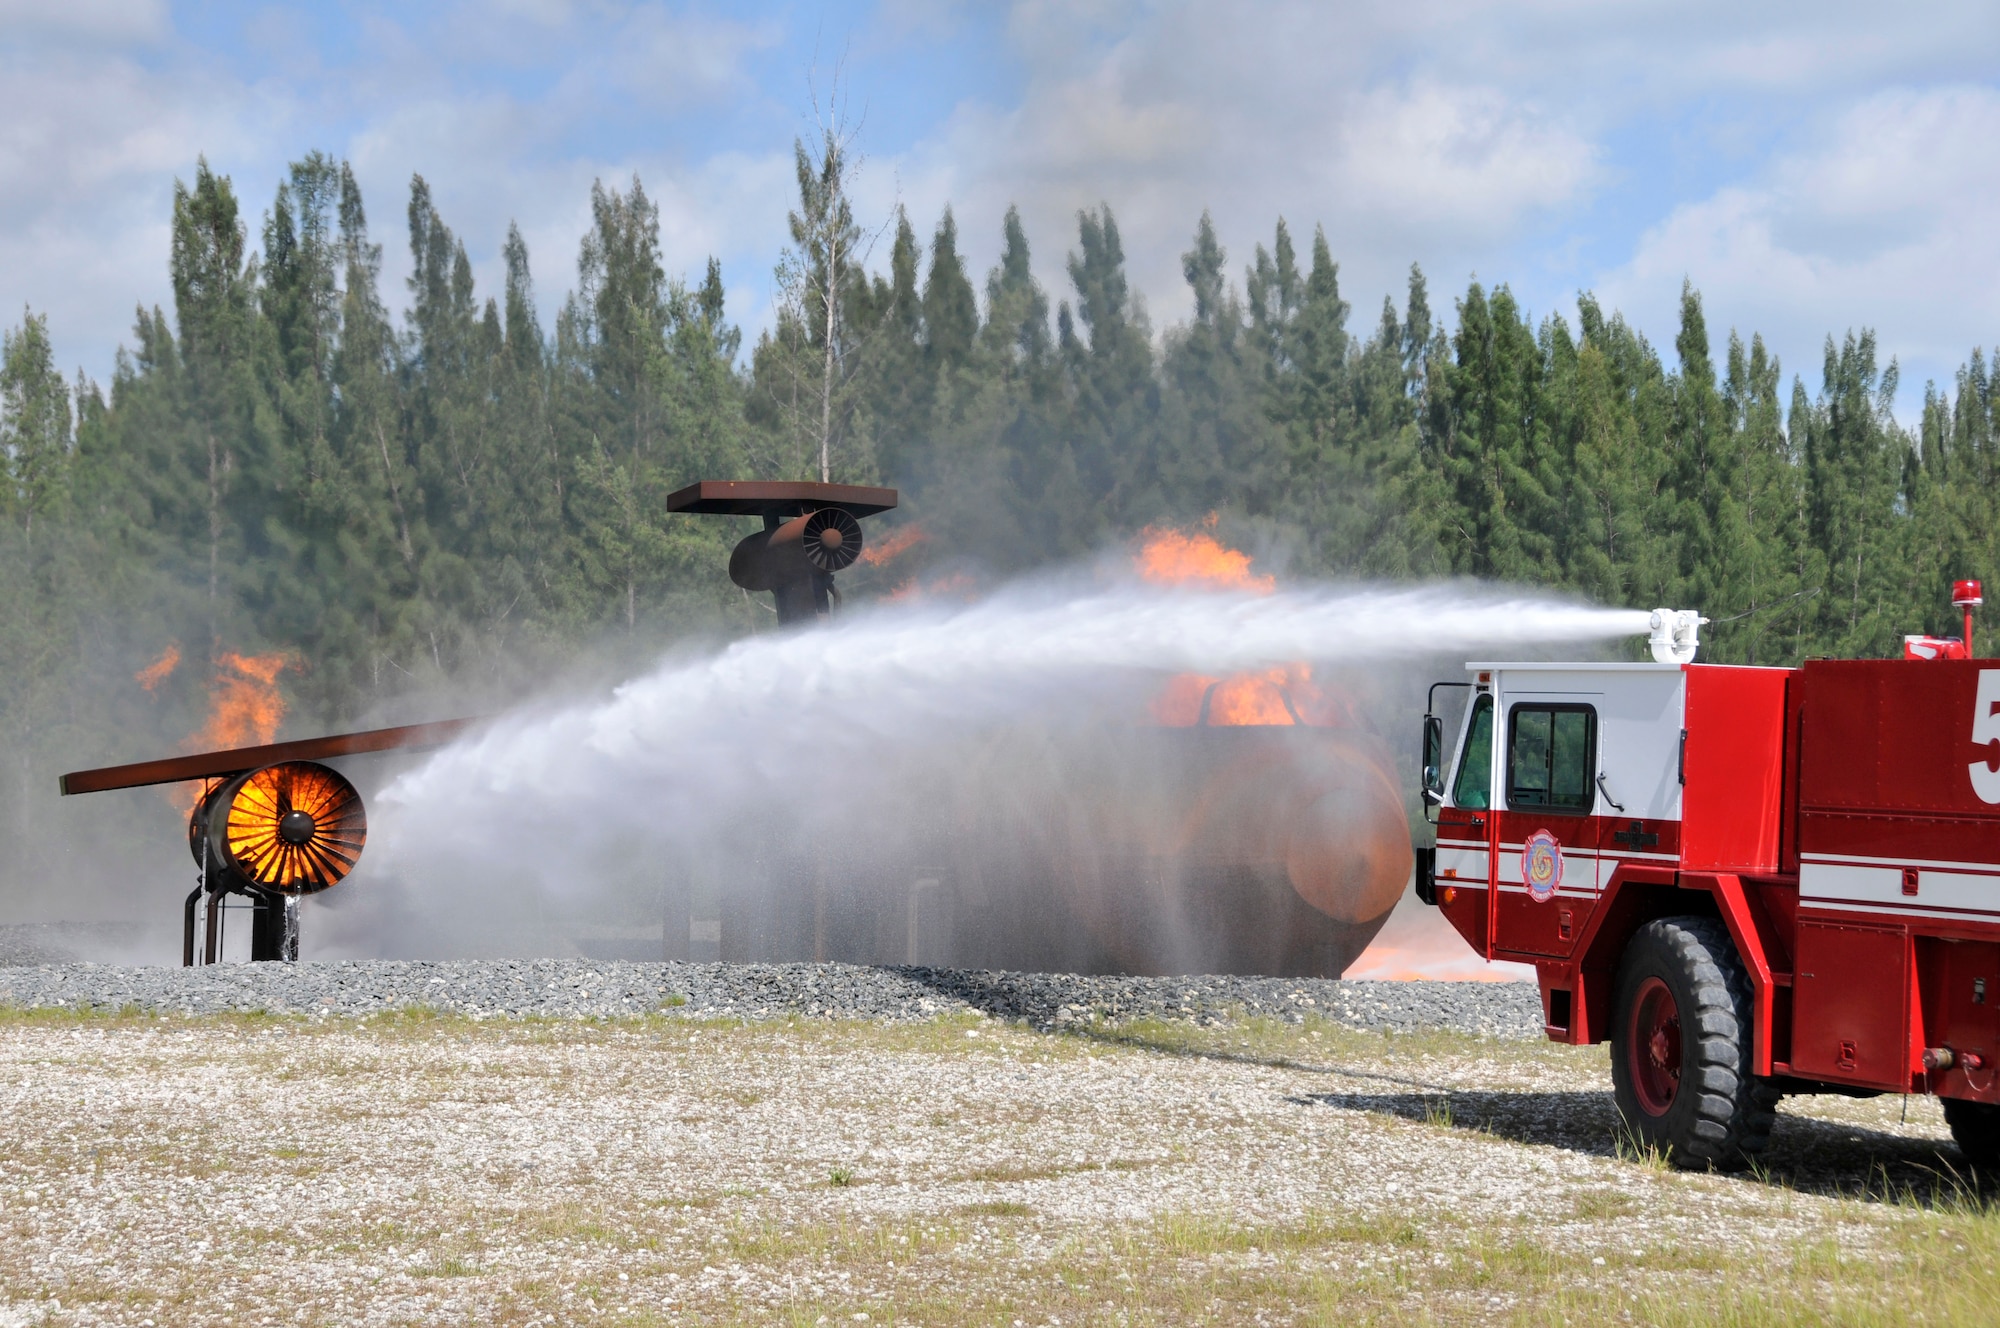 A P-19 fire truck from Homestead Air Reserve Base, Fla., fires water from its roof turret at a mock aircraft during aircraft live fire training at Homestead ARB May 15. Fires can heat up the mock aircraft to approximately 1,200 degrees. The aircraft live fire training consists of responding to the fire, setting up on the aircraft, deploying hose lines, and attacking and extinguishing the fire. (U.S. Air Force photo/Senior Airman Nicholas Caceres)